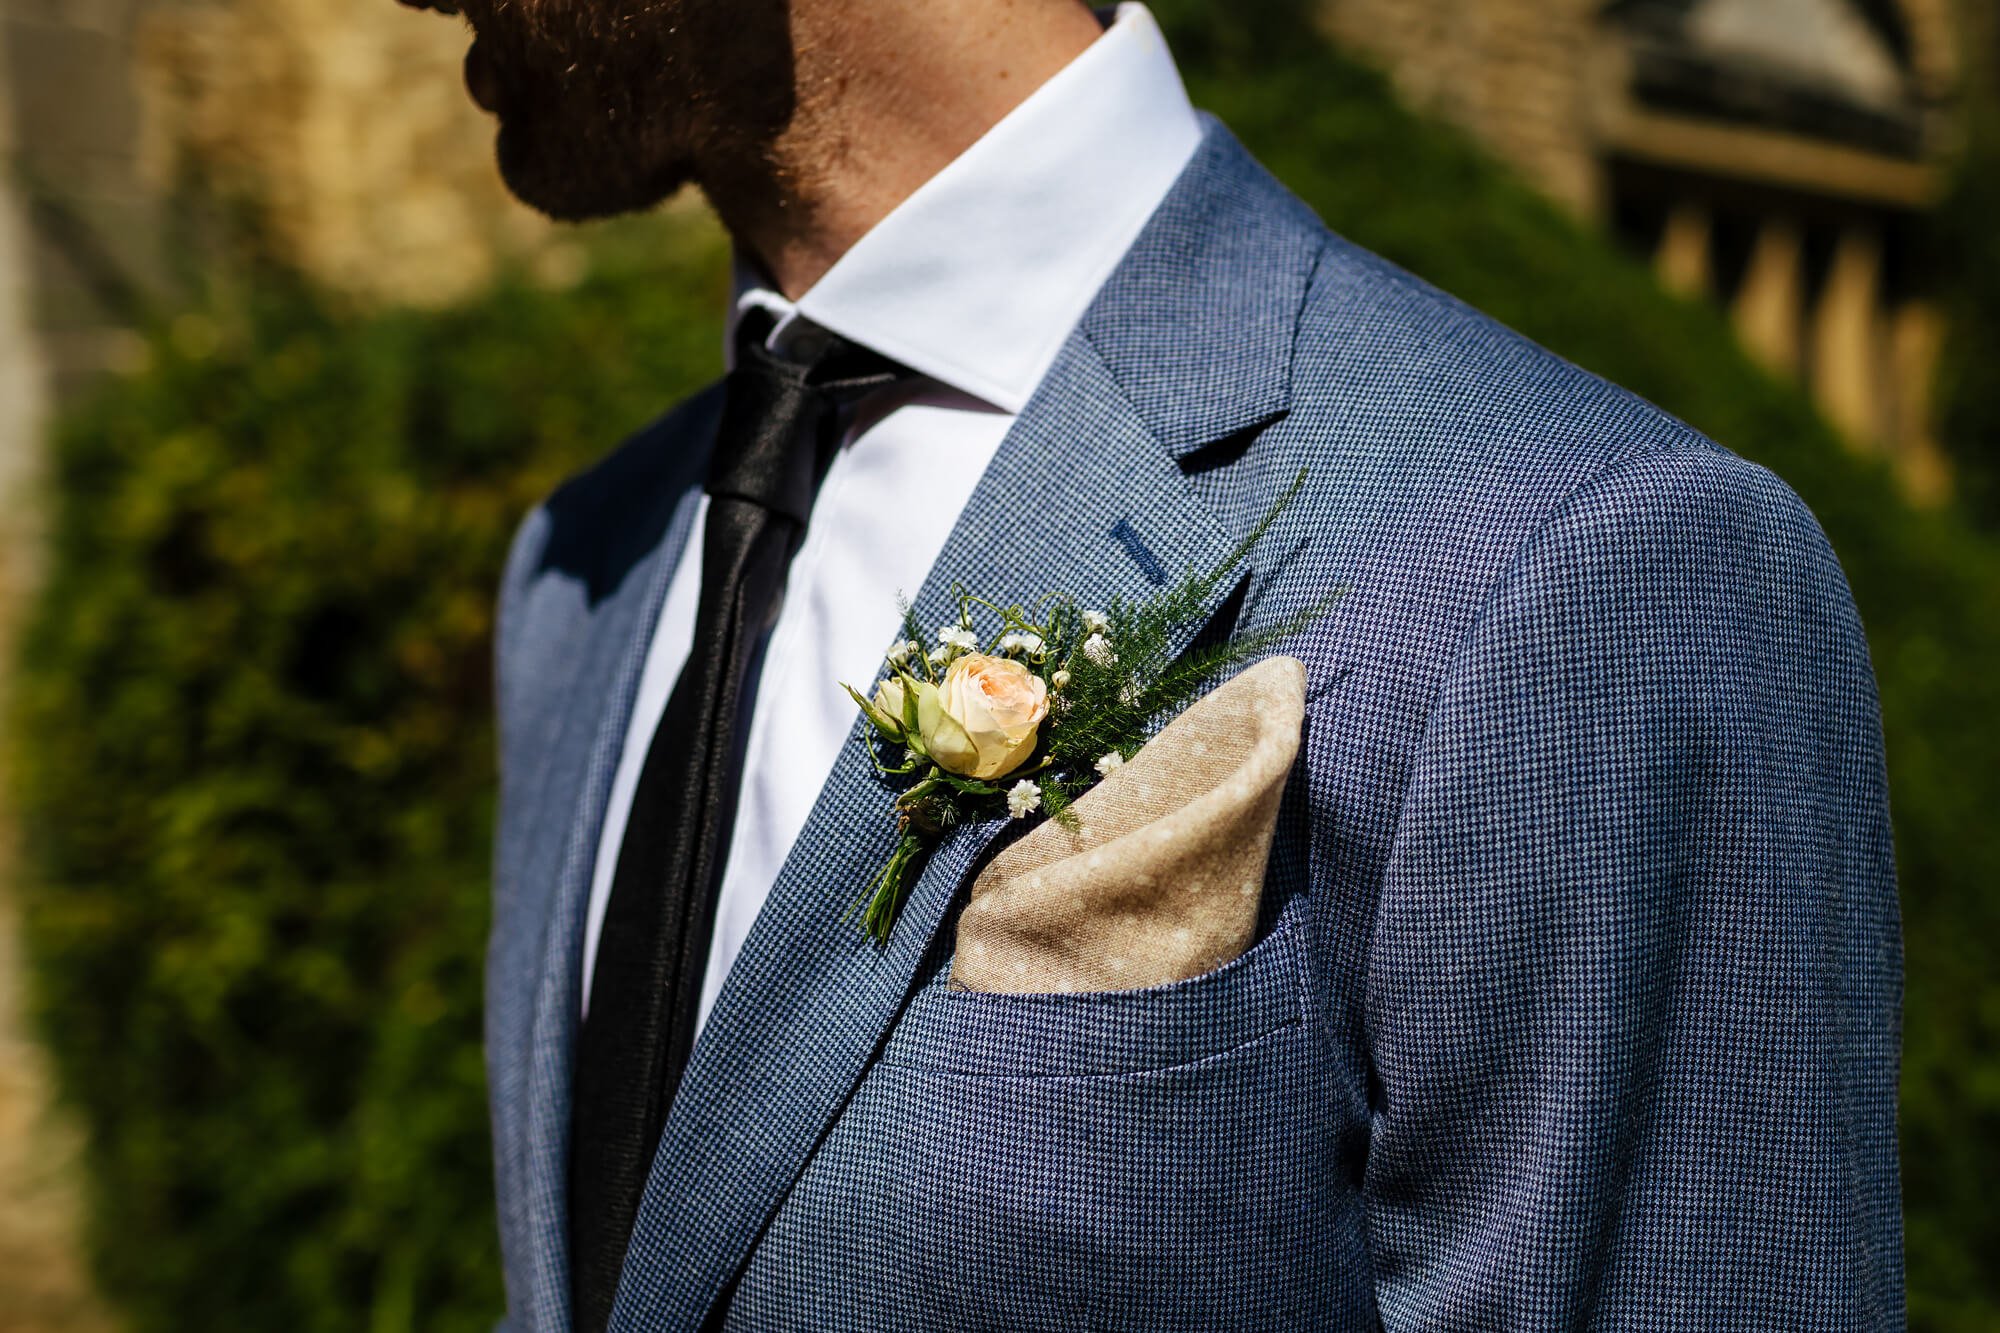 Groom's suit and buttonhole on his wedding morning